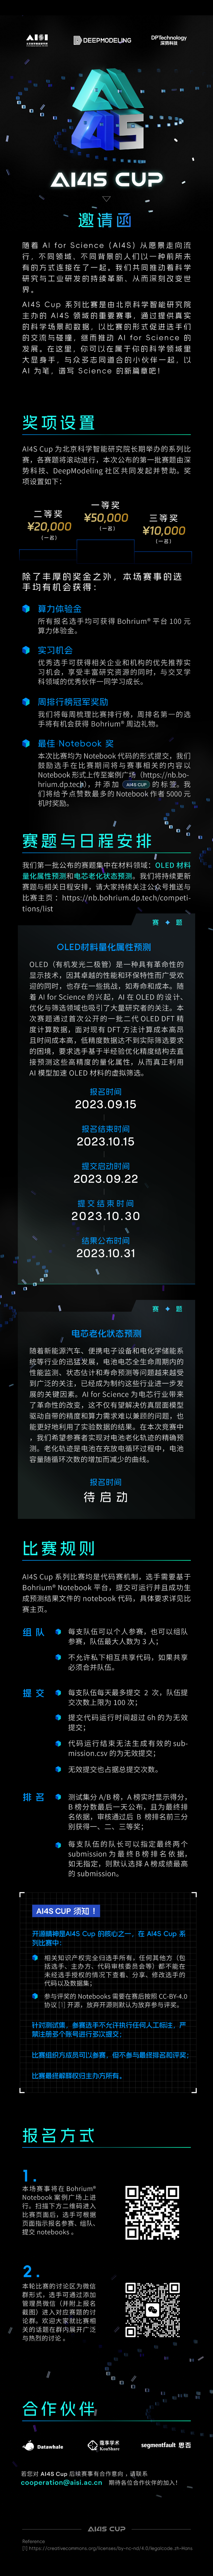 AI for Scinece Cup 邀请函：一等奖5万